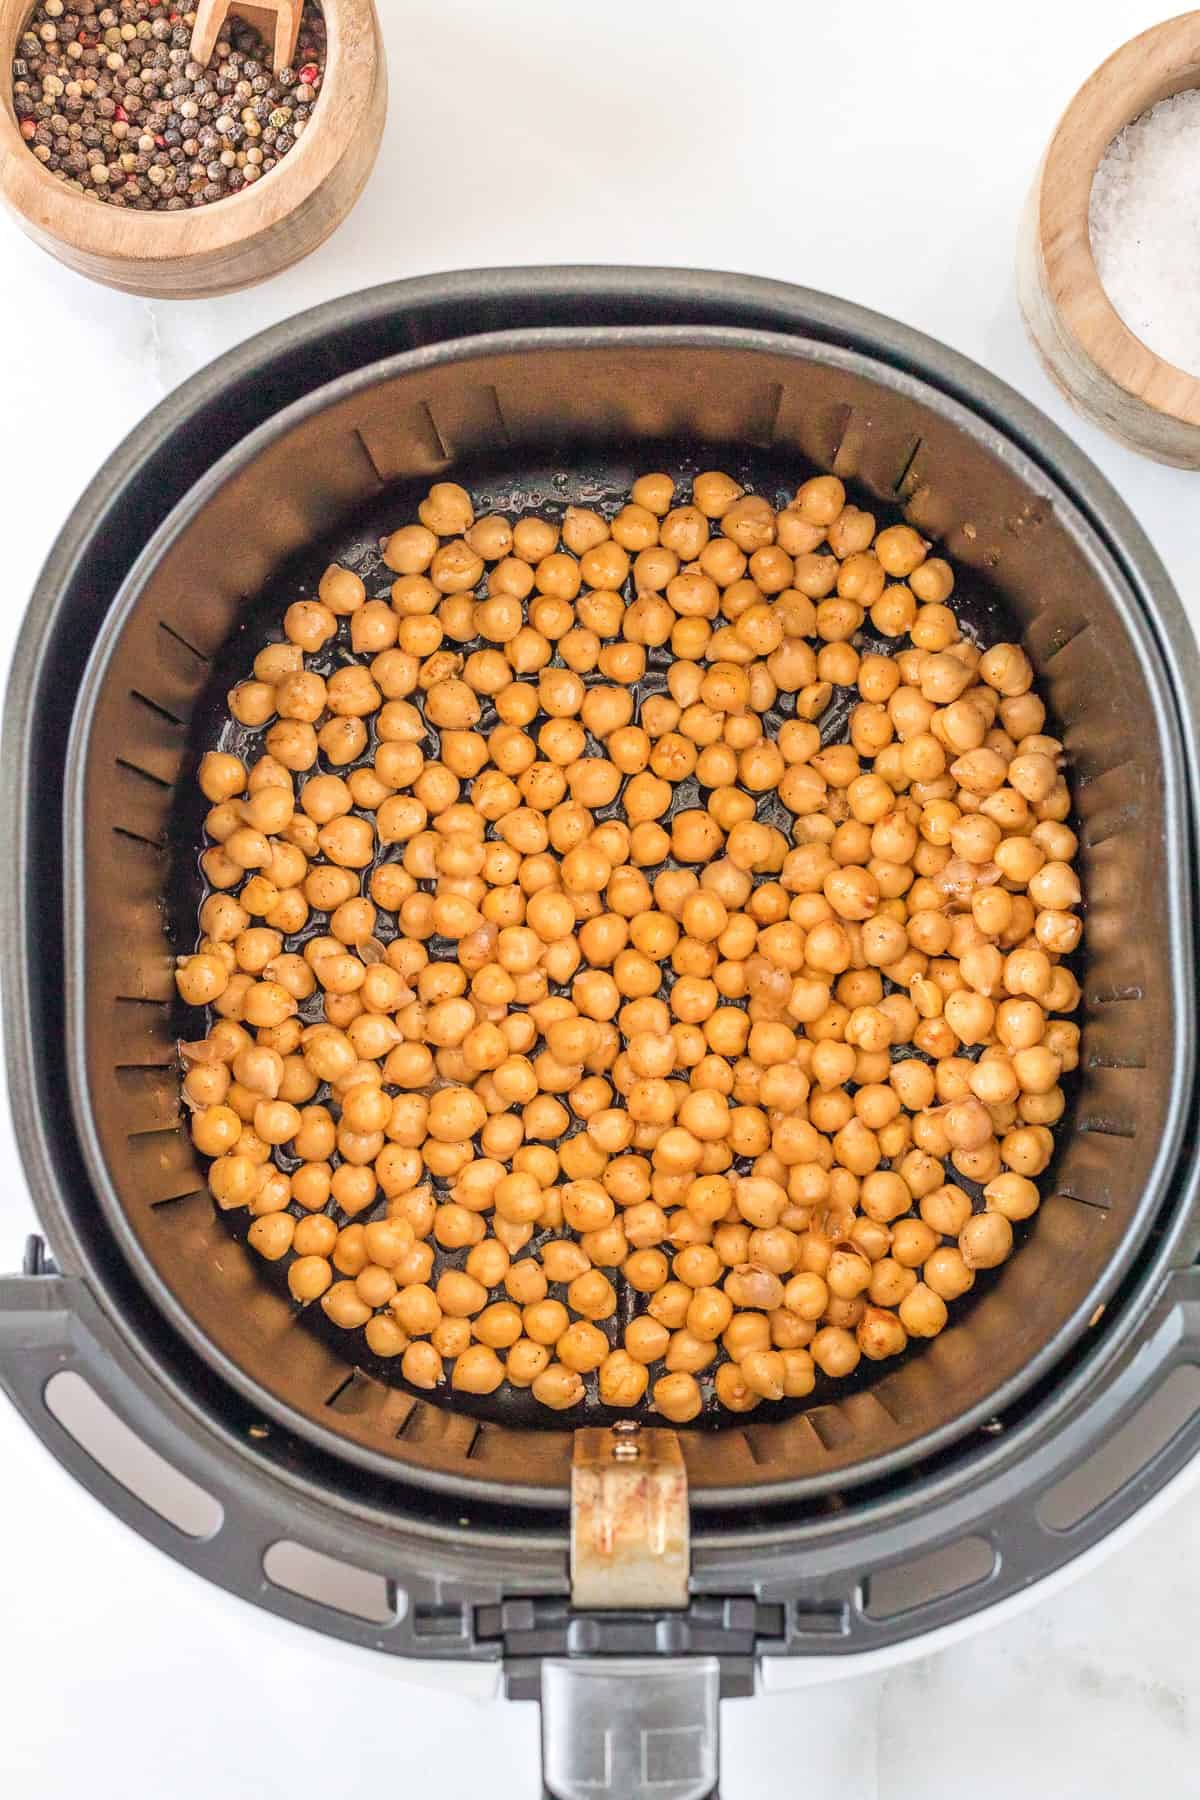 uncooked chickpeas on the basket of the air fryer.